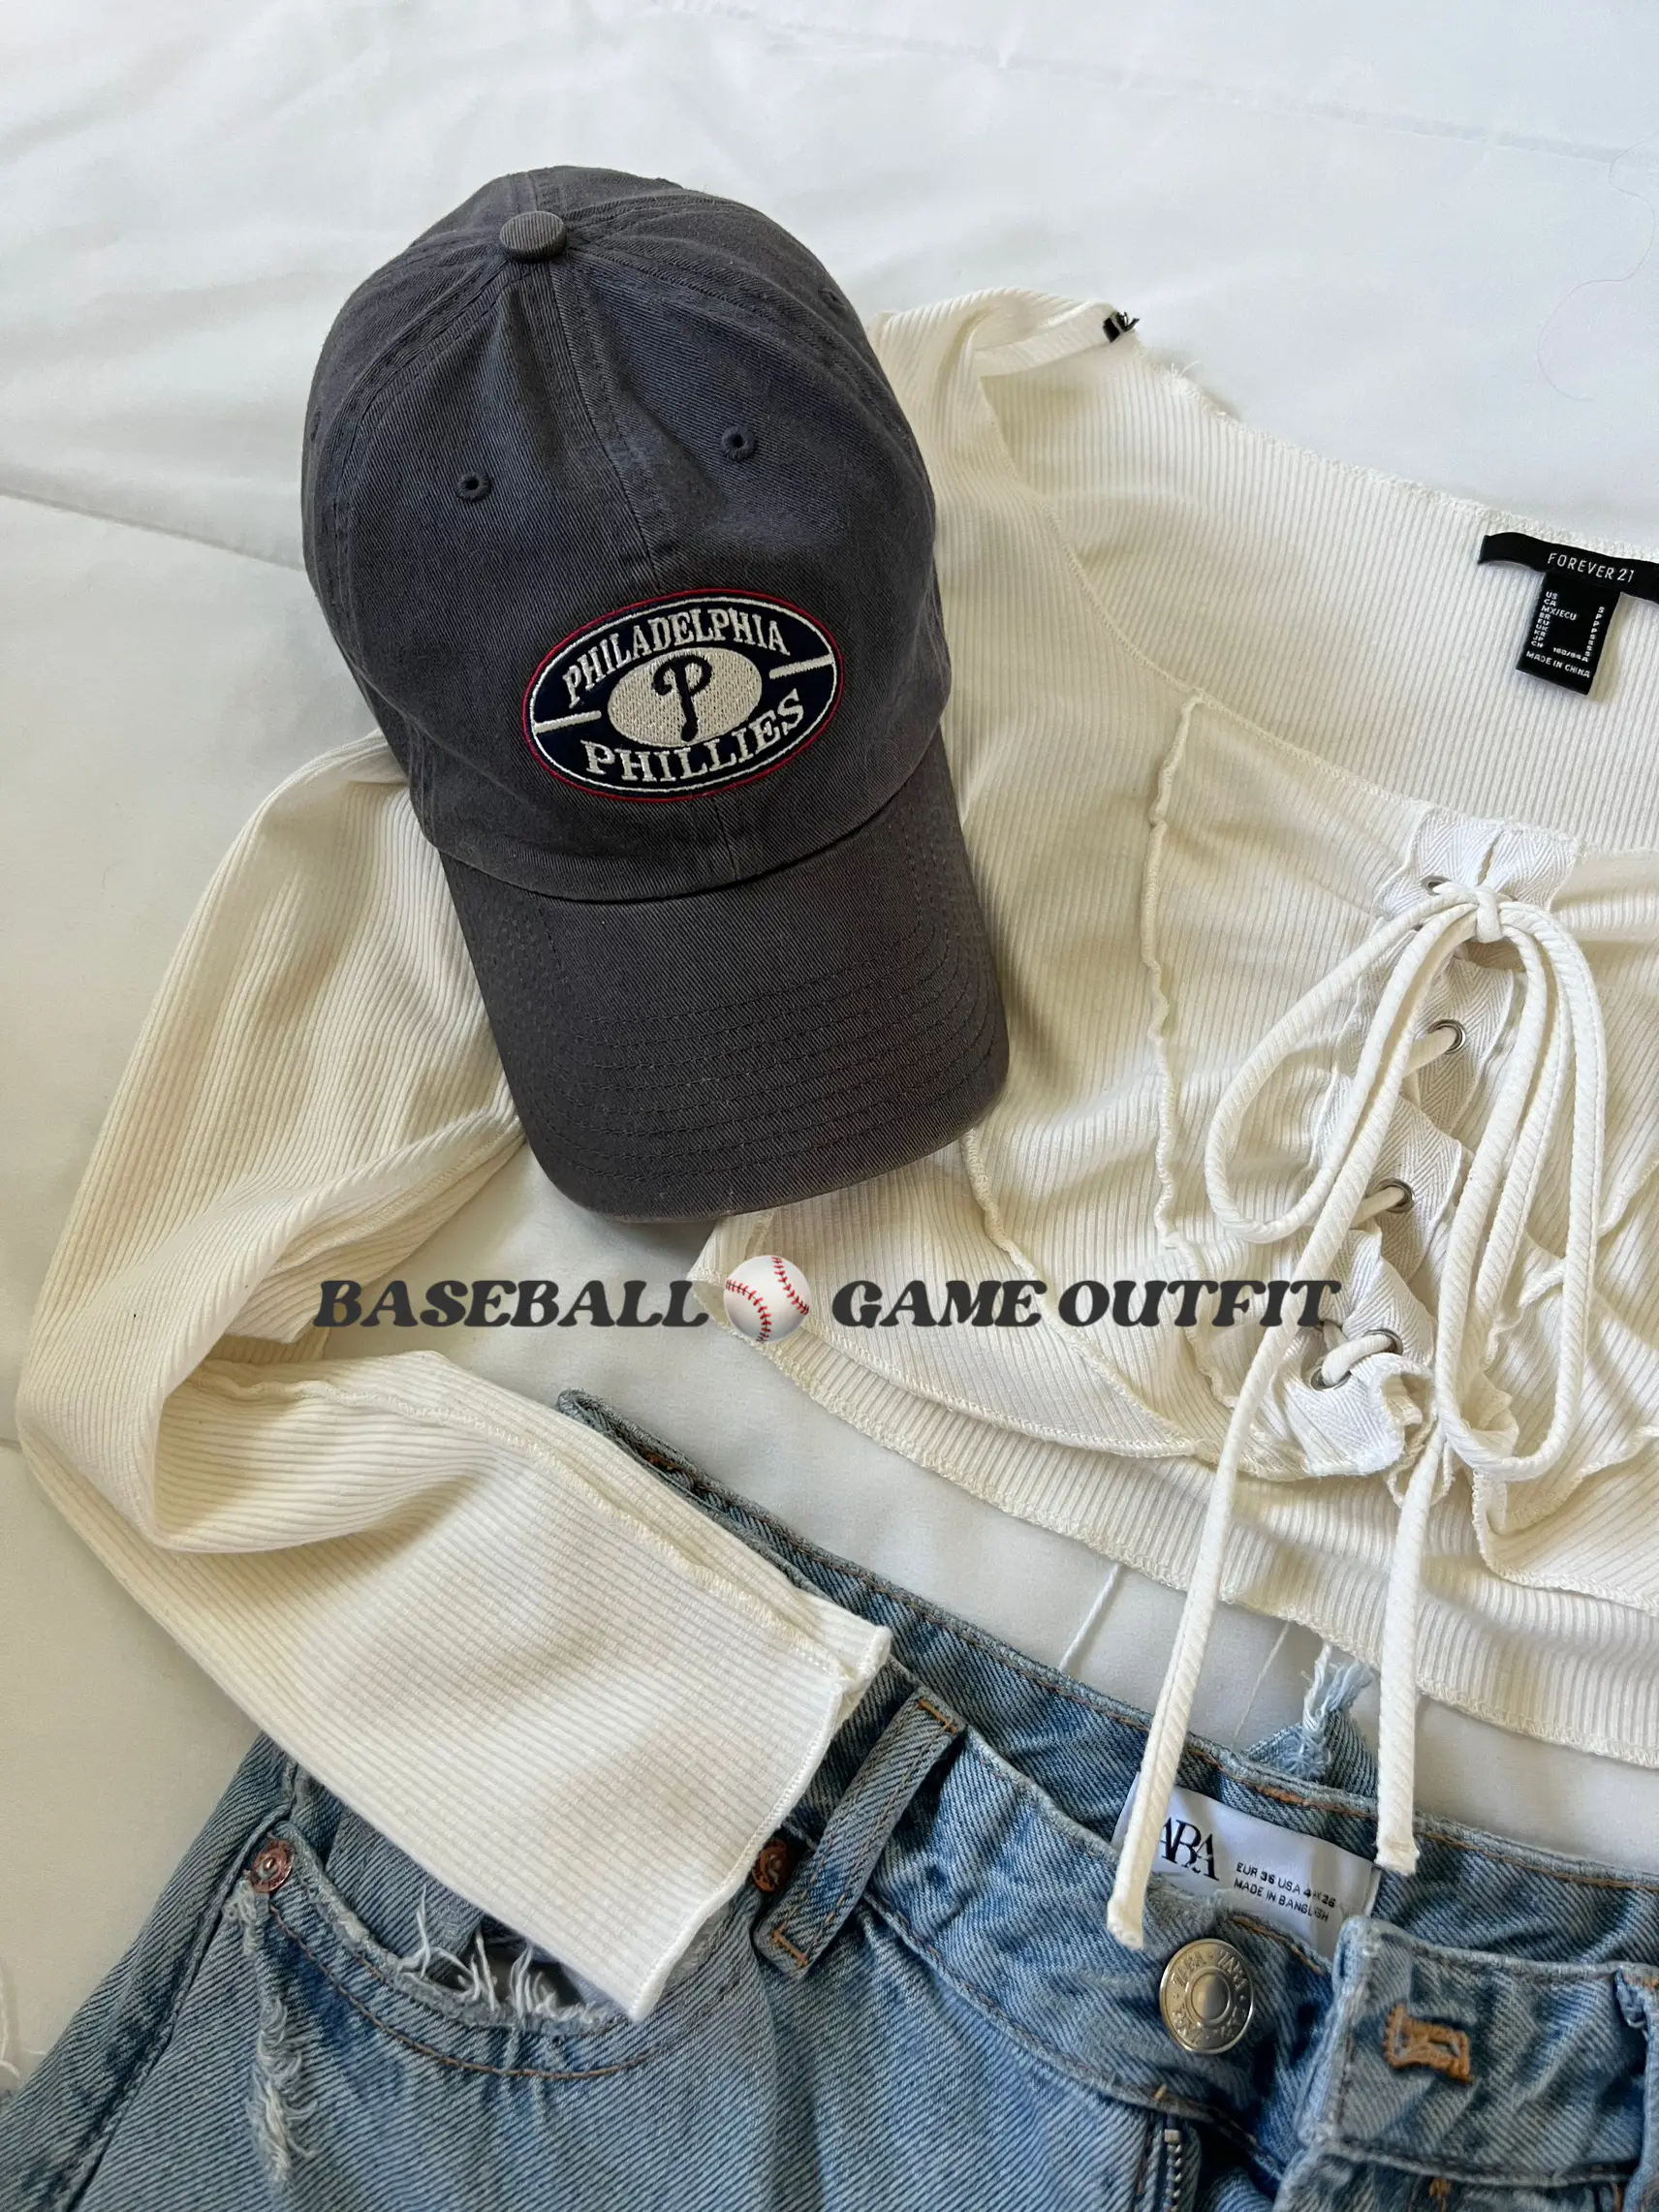 MLB Phillies Game Day Outfit  Gameday outfit, Baseball outfit, Outfits